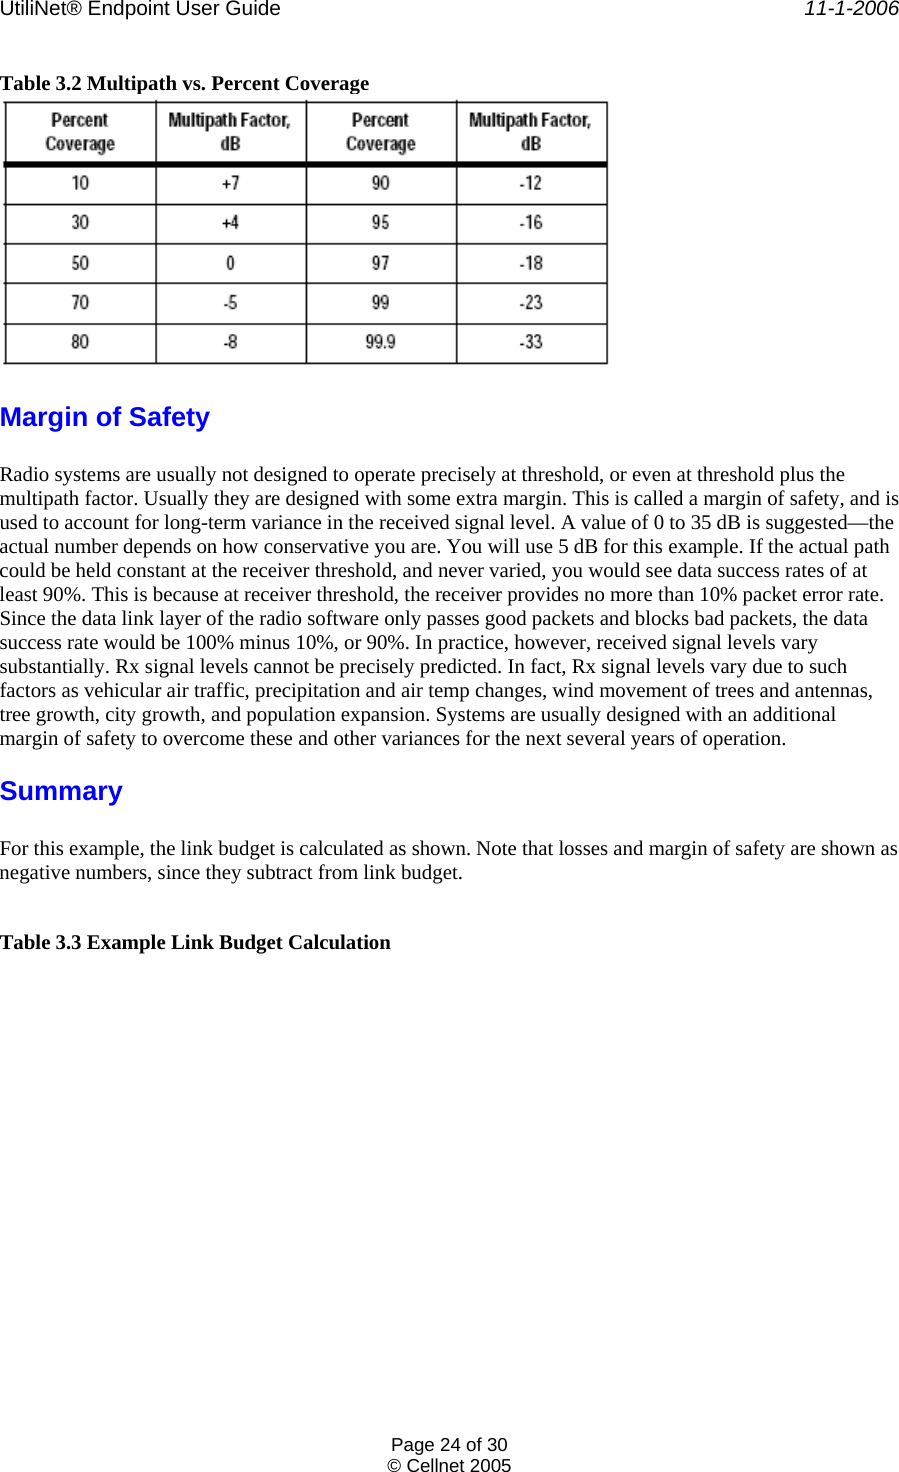 UtiliNet® Endpoint User Guide    11-1-2006 Page 24 of 30 © Cellnet 2005  Table 3.2 Multipath vs. Percent Coverage  Margin of Safety  Radio systems are usually not designed to operate precisely at threshold, or even at threshold plus the multipath factor. Usually they are designed with some extra margin. This is called a margin of safety, and is used to account for long-term variance in the received signal level. A value of 0 to 35 dB is suggested—the actual number depends on how conservative you are. You will use 5 dB for this example. If the actual path could be held constant at the receiver threshold, and never varied, you would see data success rates of at least 90%. This is because at receiver threshold, the receiver provides no more than 10% packet error rate. Since the data link layer of the radio software only passes good packets and blocks bad packets, the data success rate would be 100% minus 10%, or 90%. In practice, however, received signal levels vary substantially. Rx signal levels cannot be precisely predicted. In fact, Rx signal levels vary due to such factors as vehicular air traffic, precipitation and air temp changes, wind movement of trees and antennas, tree growth, city growth, and population expansion. Systems are usually designed with an additional margin of safety to overcome these and other variances for the next several years of operation. Summary  For this example, the link budget is calculated as shown. Note that losses and margin of safety are shown as negative numbers, since they subtract from link budget.   Table 3.3 Example Link Budget Calculation 